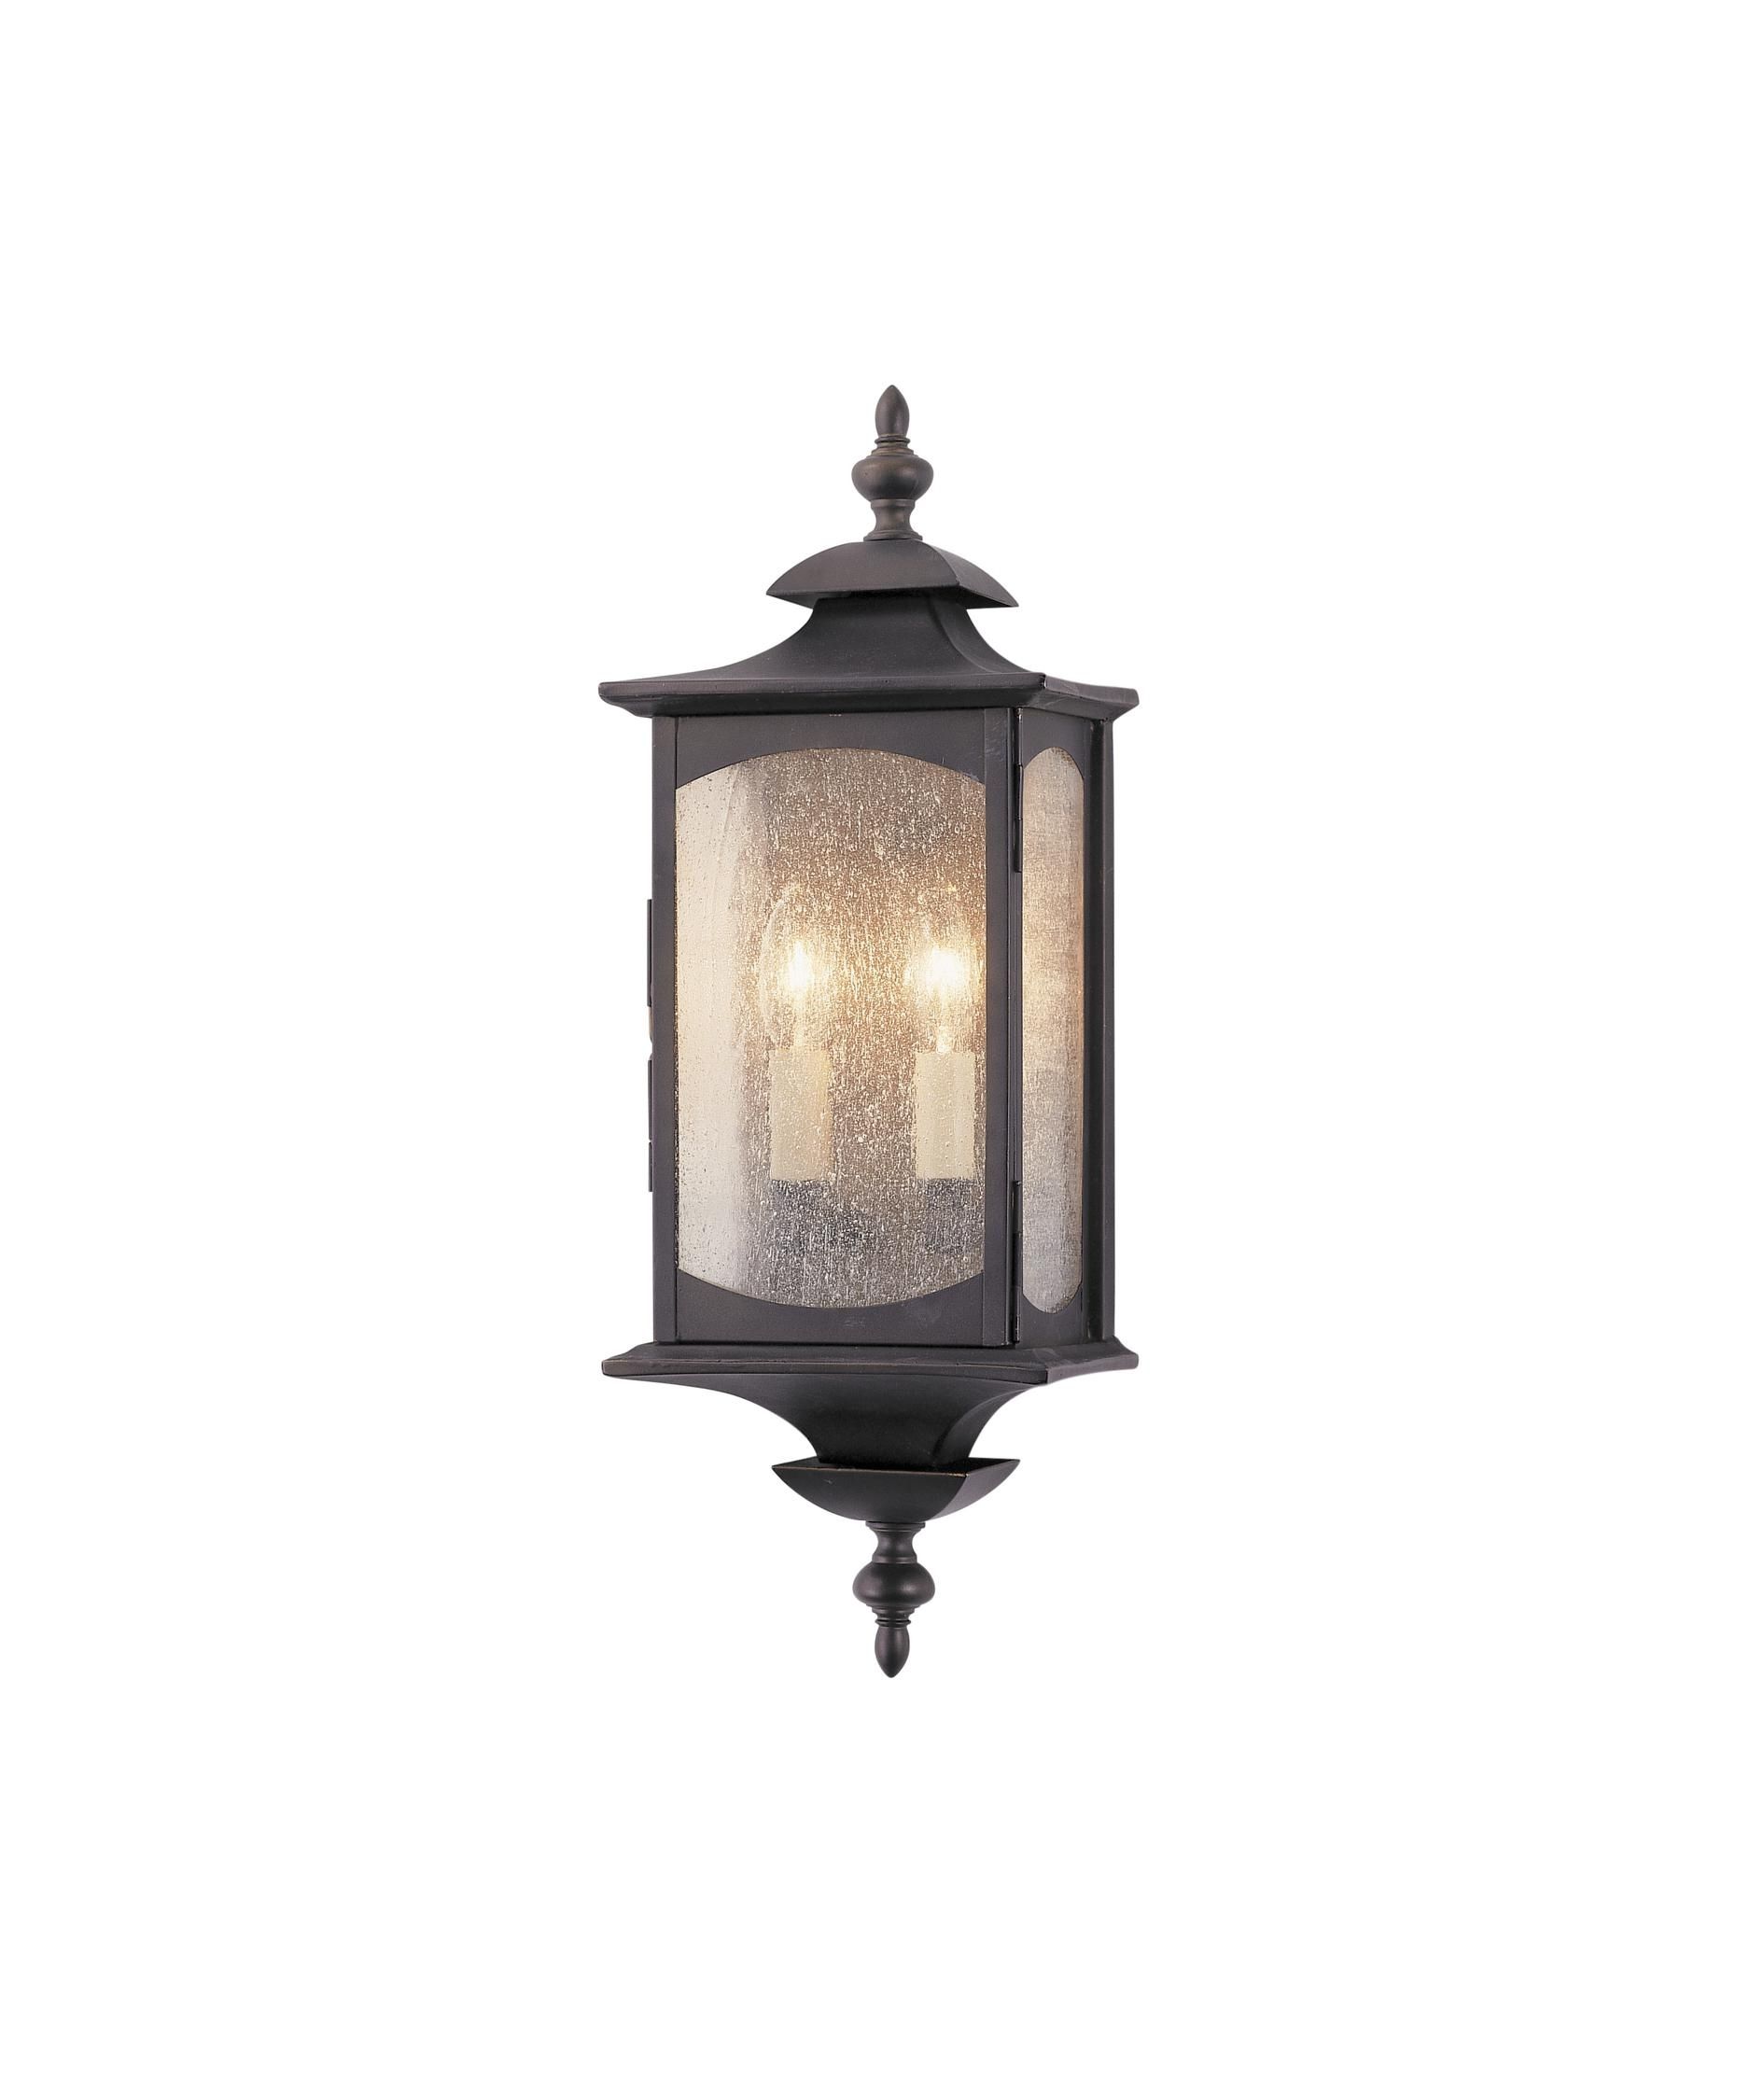 Murray Feiss Ol2601 Market Square 7 Inch Wide 2 Light Outdoor Wall Pertaining To Outdoor Wall Lighting With Seeded Glass (View 14 of 15)